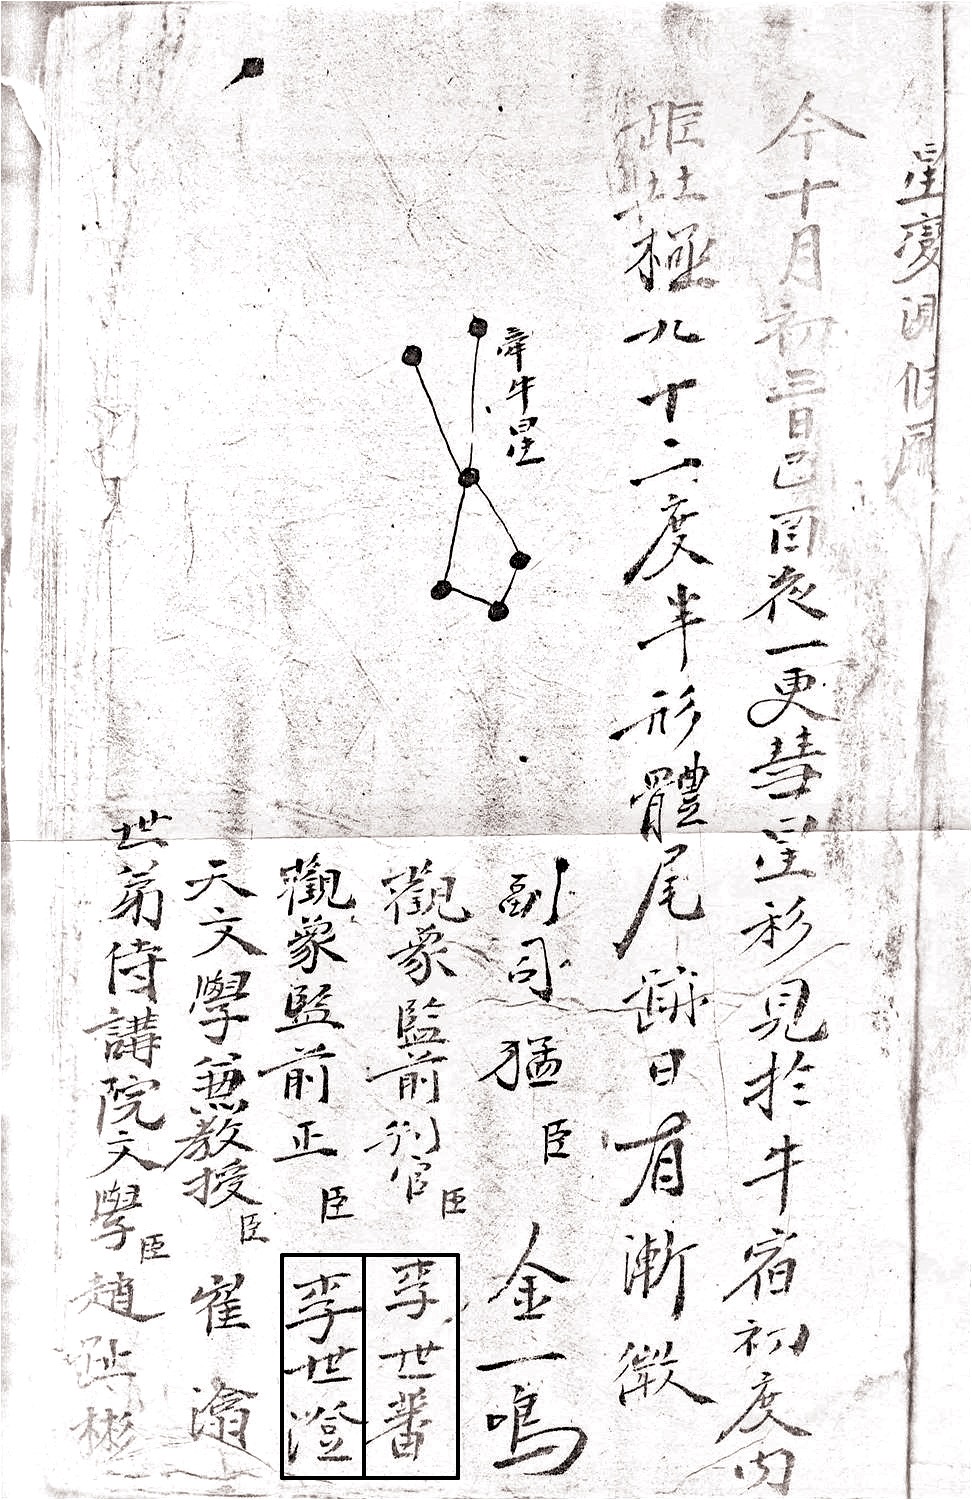 A comet record on the third day of the tenth month of the 1723 SeongbyeonDeungrok. Two names, Yi Se-beon (李世蕃) and Yi Se-jing (李世澄), are seen side by side (Courtesy of Yonsei University Library).